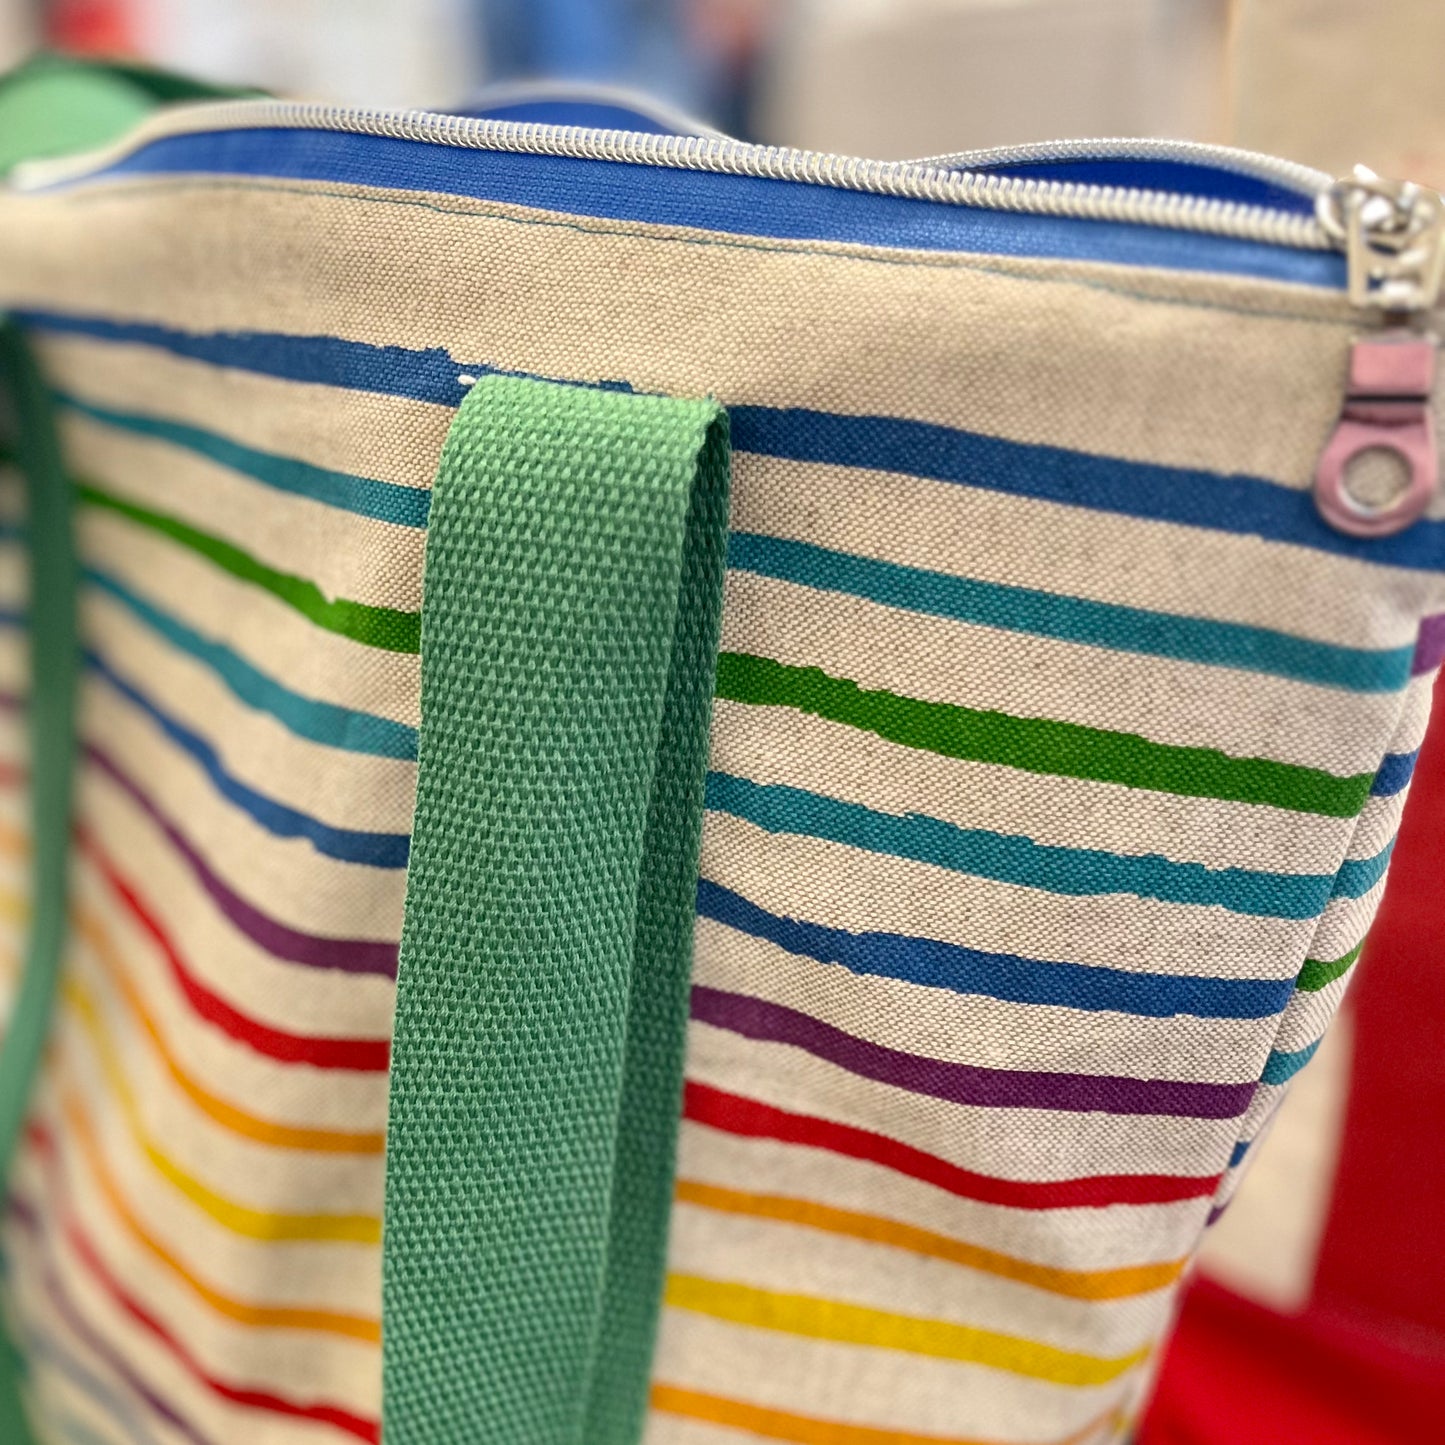 close up of the top zip of a brightly coloured stripey shoulder bag - you can see the silver zipper pull, a blue zip and one of the green shoulder straps hanging down against the rainbow striped bag. 